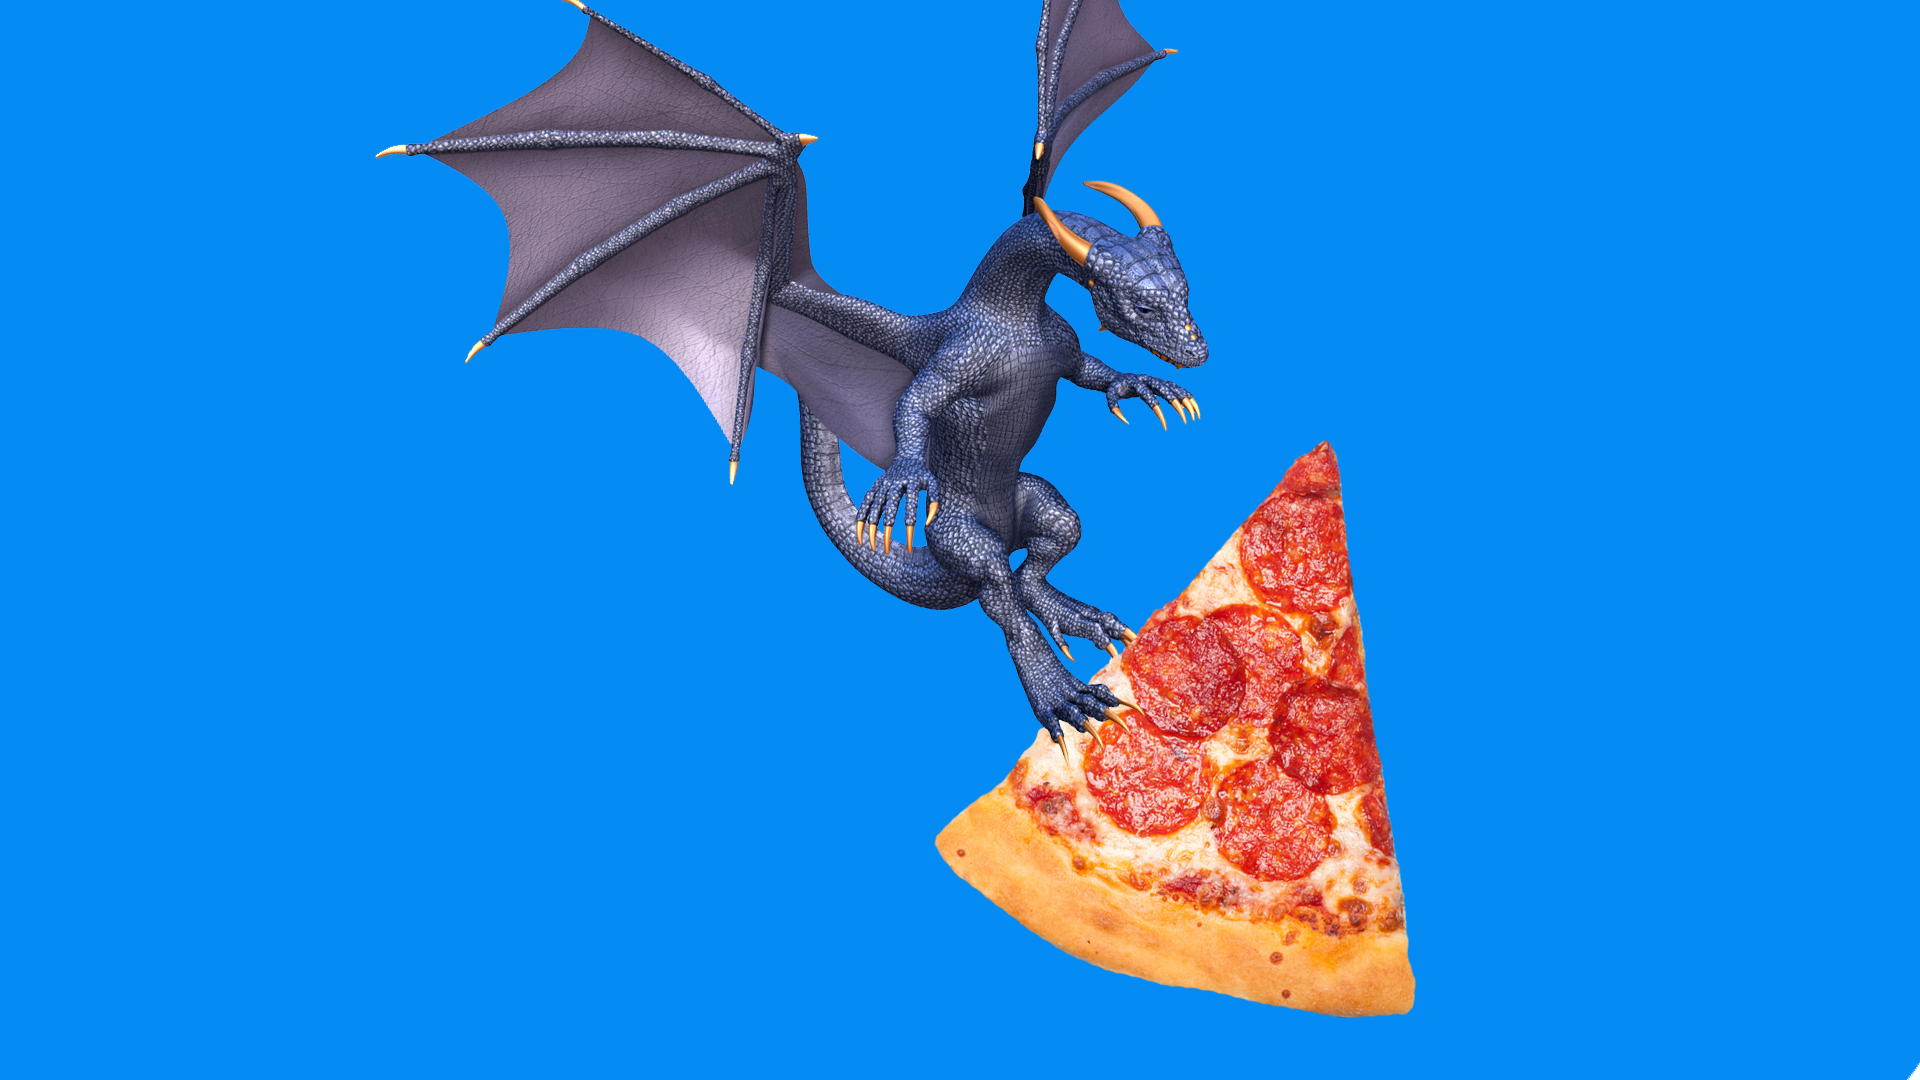 A dragon carrying a slice of pepperoni pizza